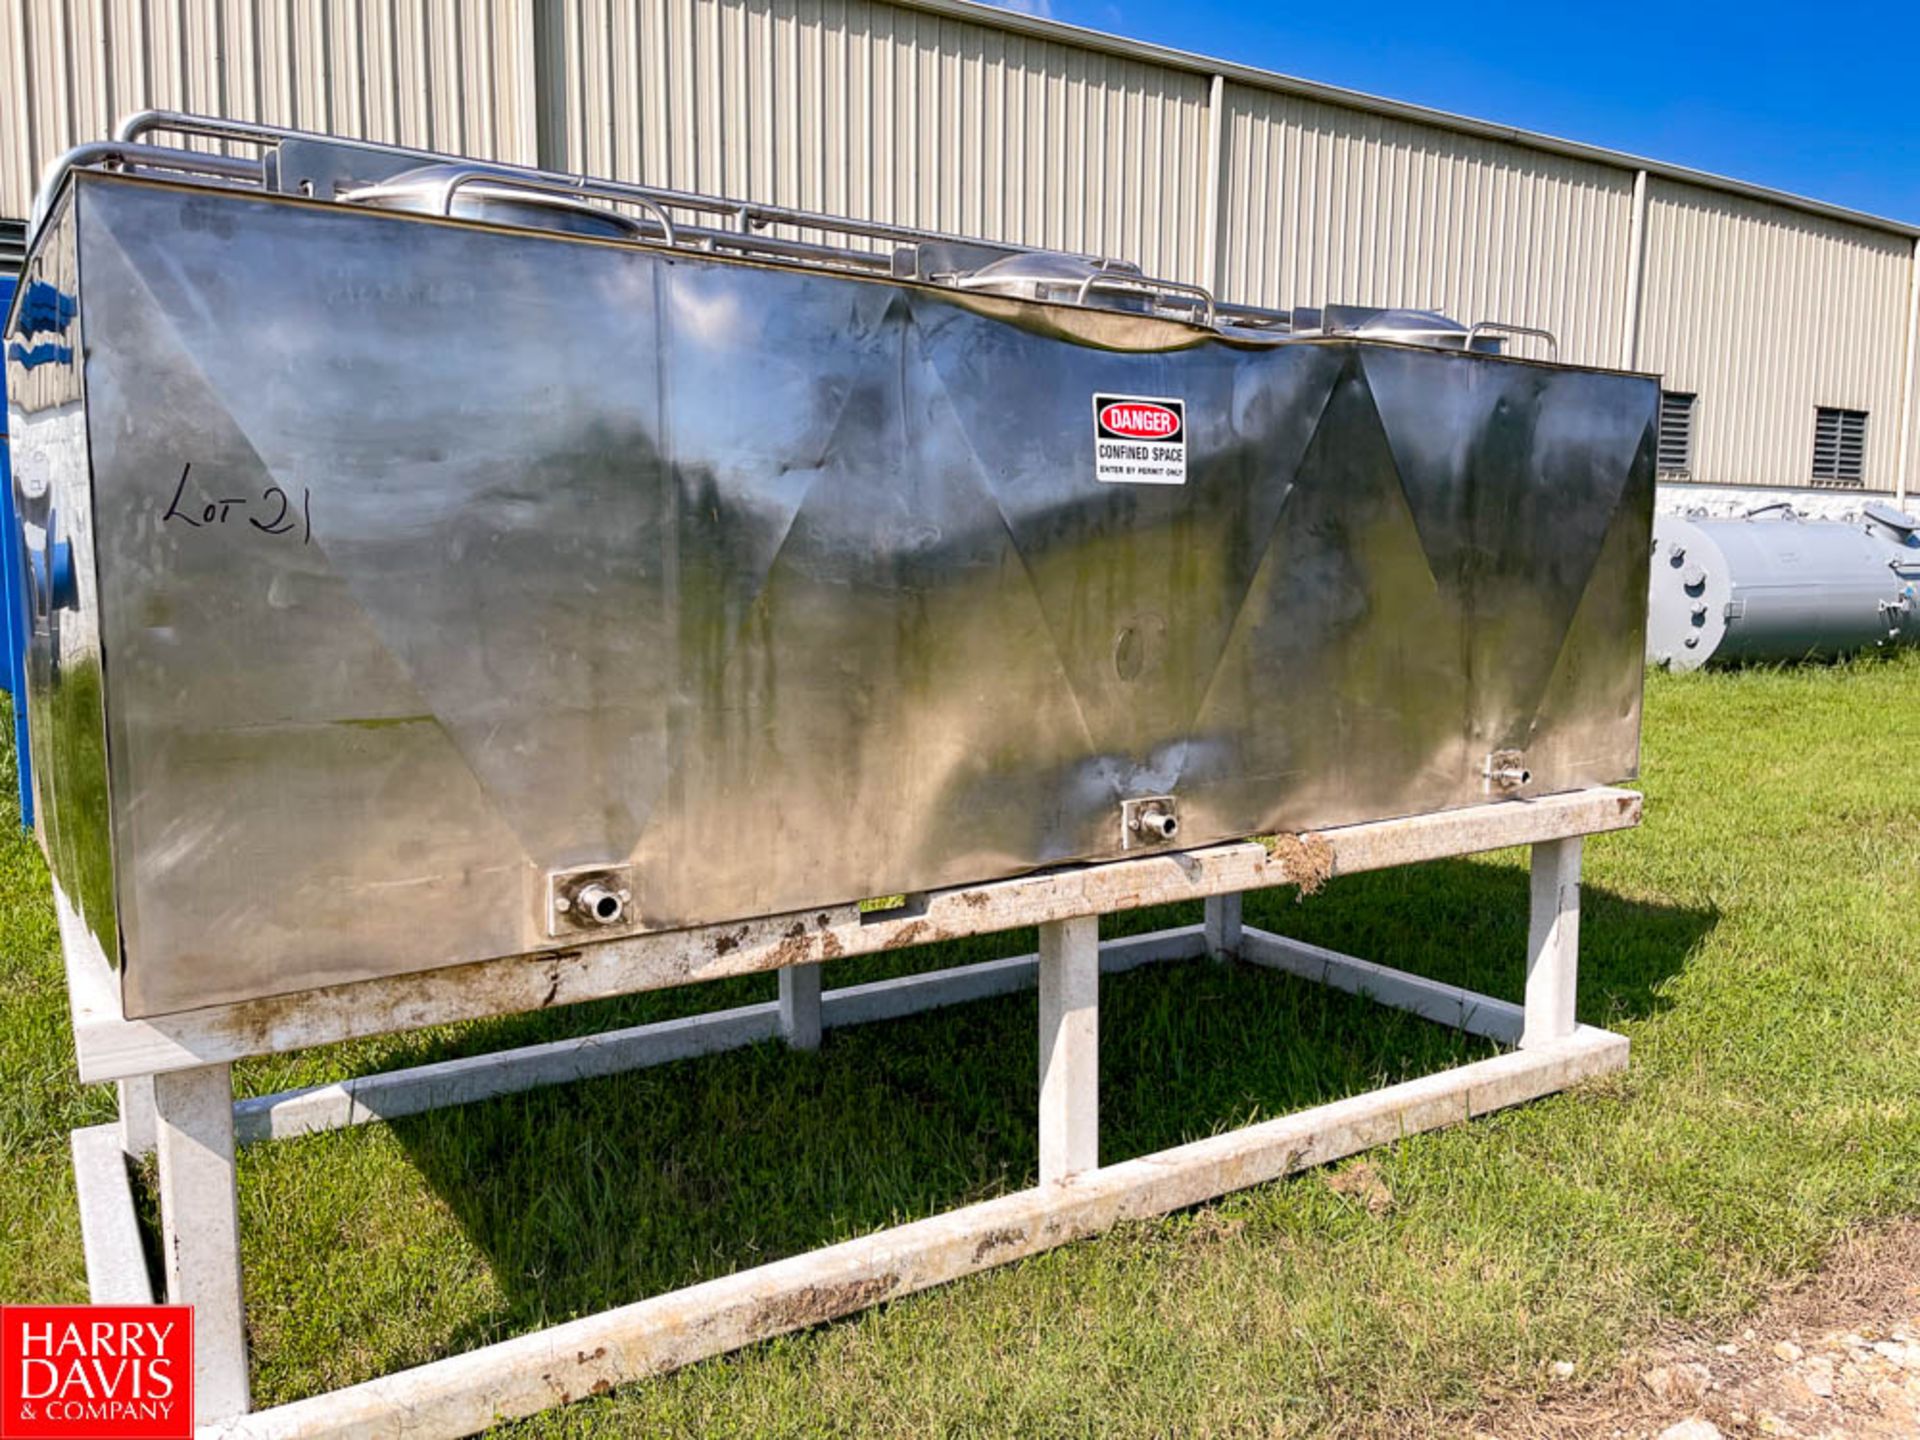 3 Compartment X 500 Gallon S/S Flavor Tank Mounted On Steel Stand - Image 2 of 2